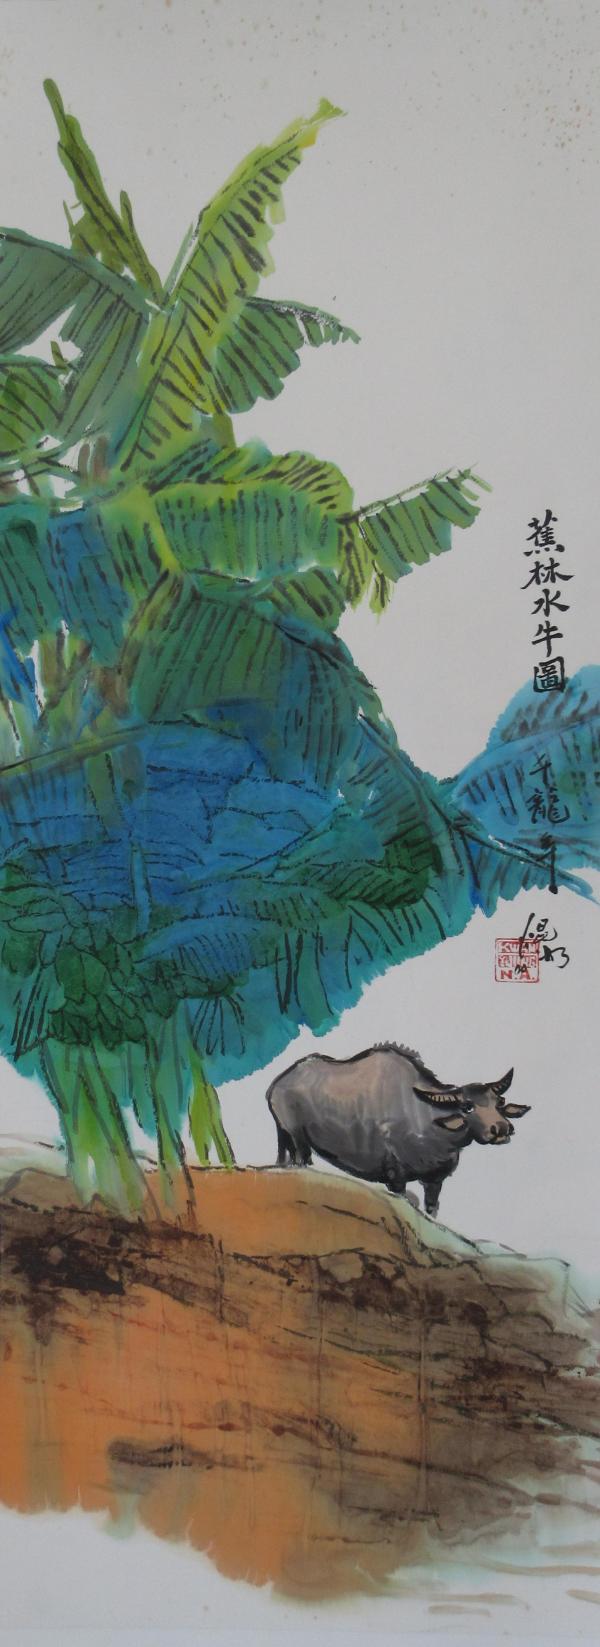 Standing Water Buffalo by Kwan Y. Jung